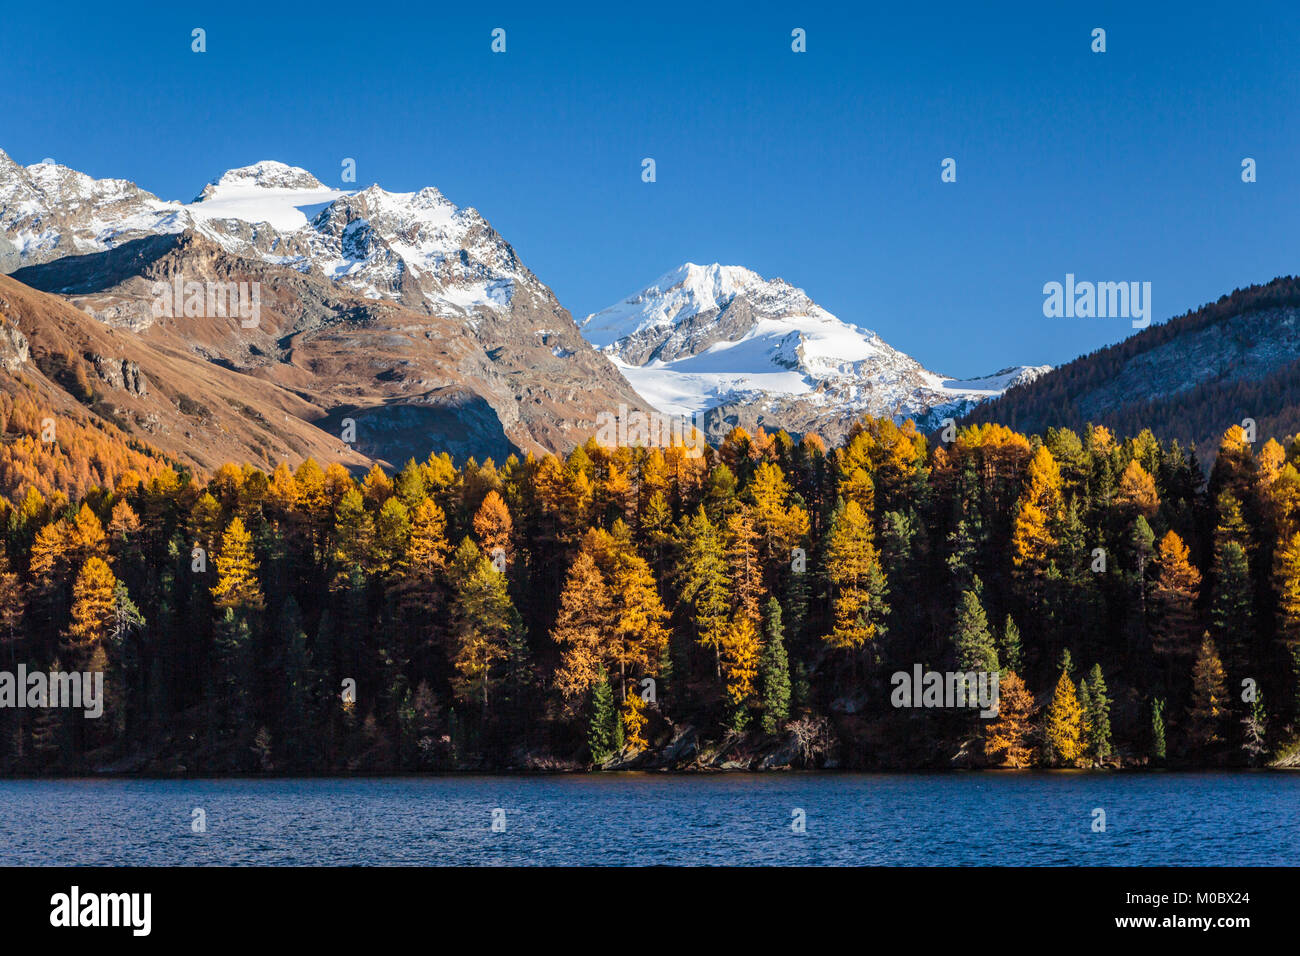 Swiss alps mountains with larch trees in the autumn season near the Julier Pass, Switzerland, Europe. Stock Photo